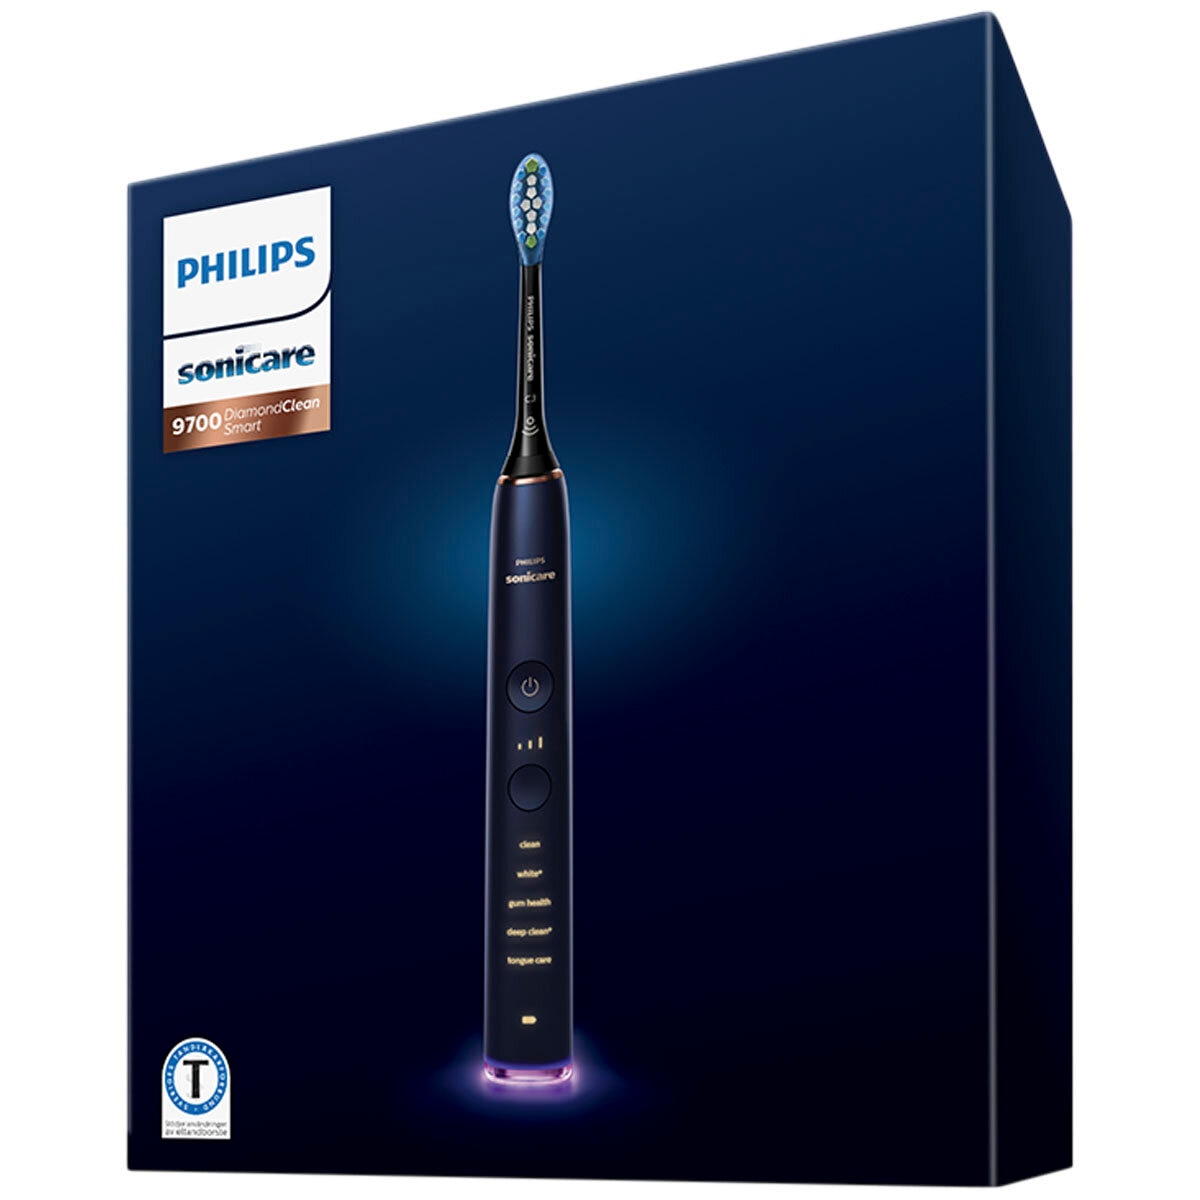 Philips Sonicare DiamondClean Smart Electric Toothbrush Lunar Blue